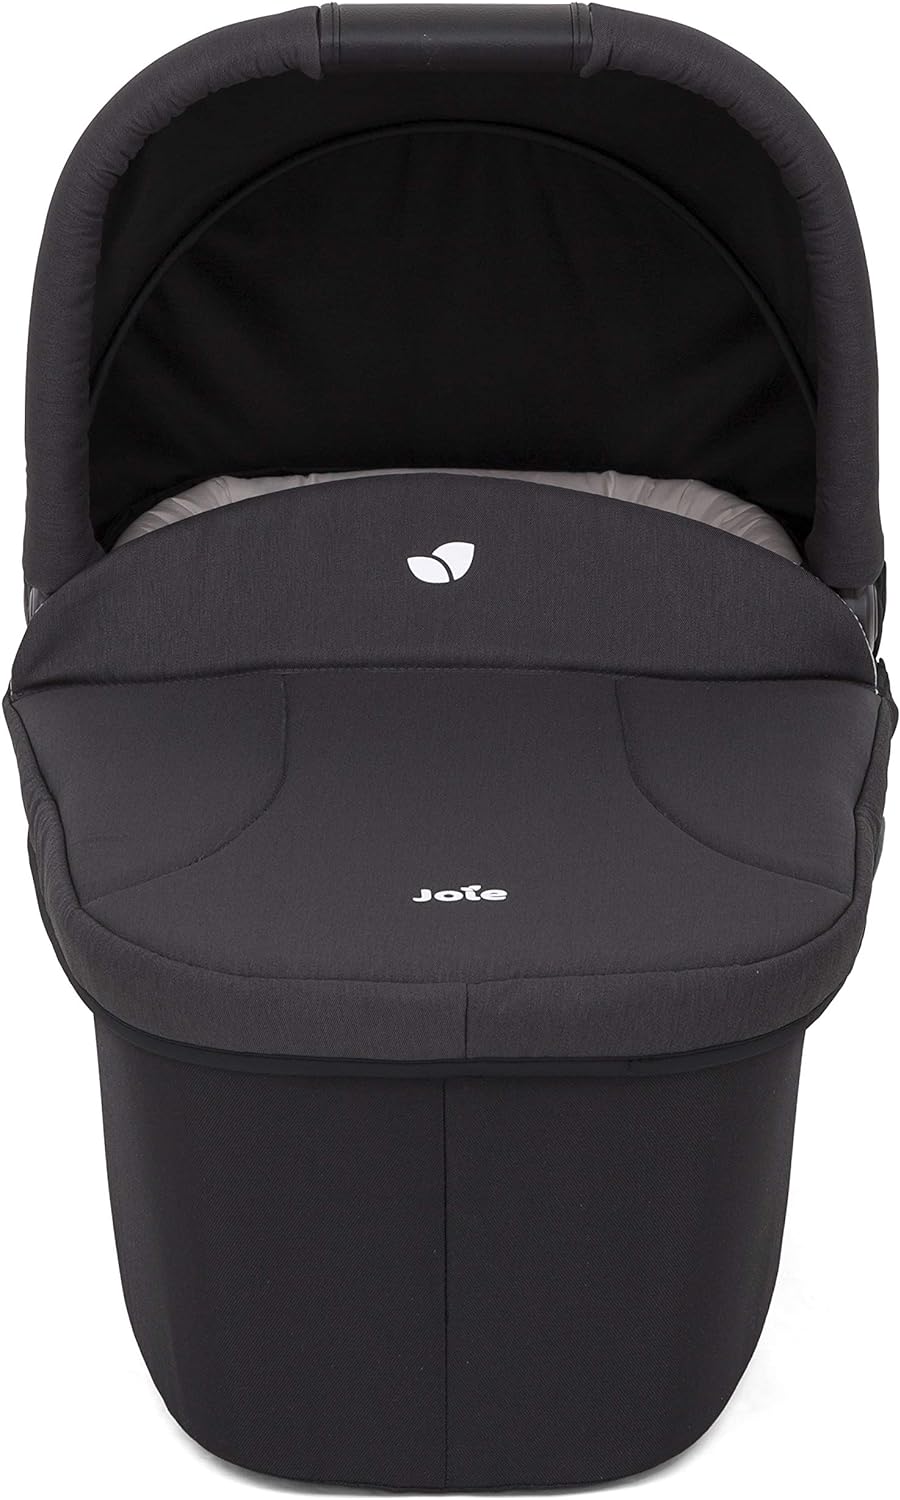 JOIE Chrome™ Carry Cot Stroller Ember